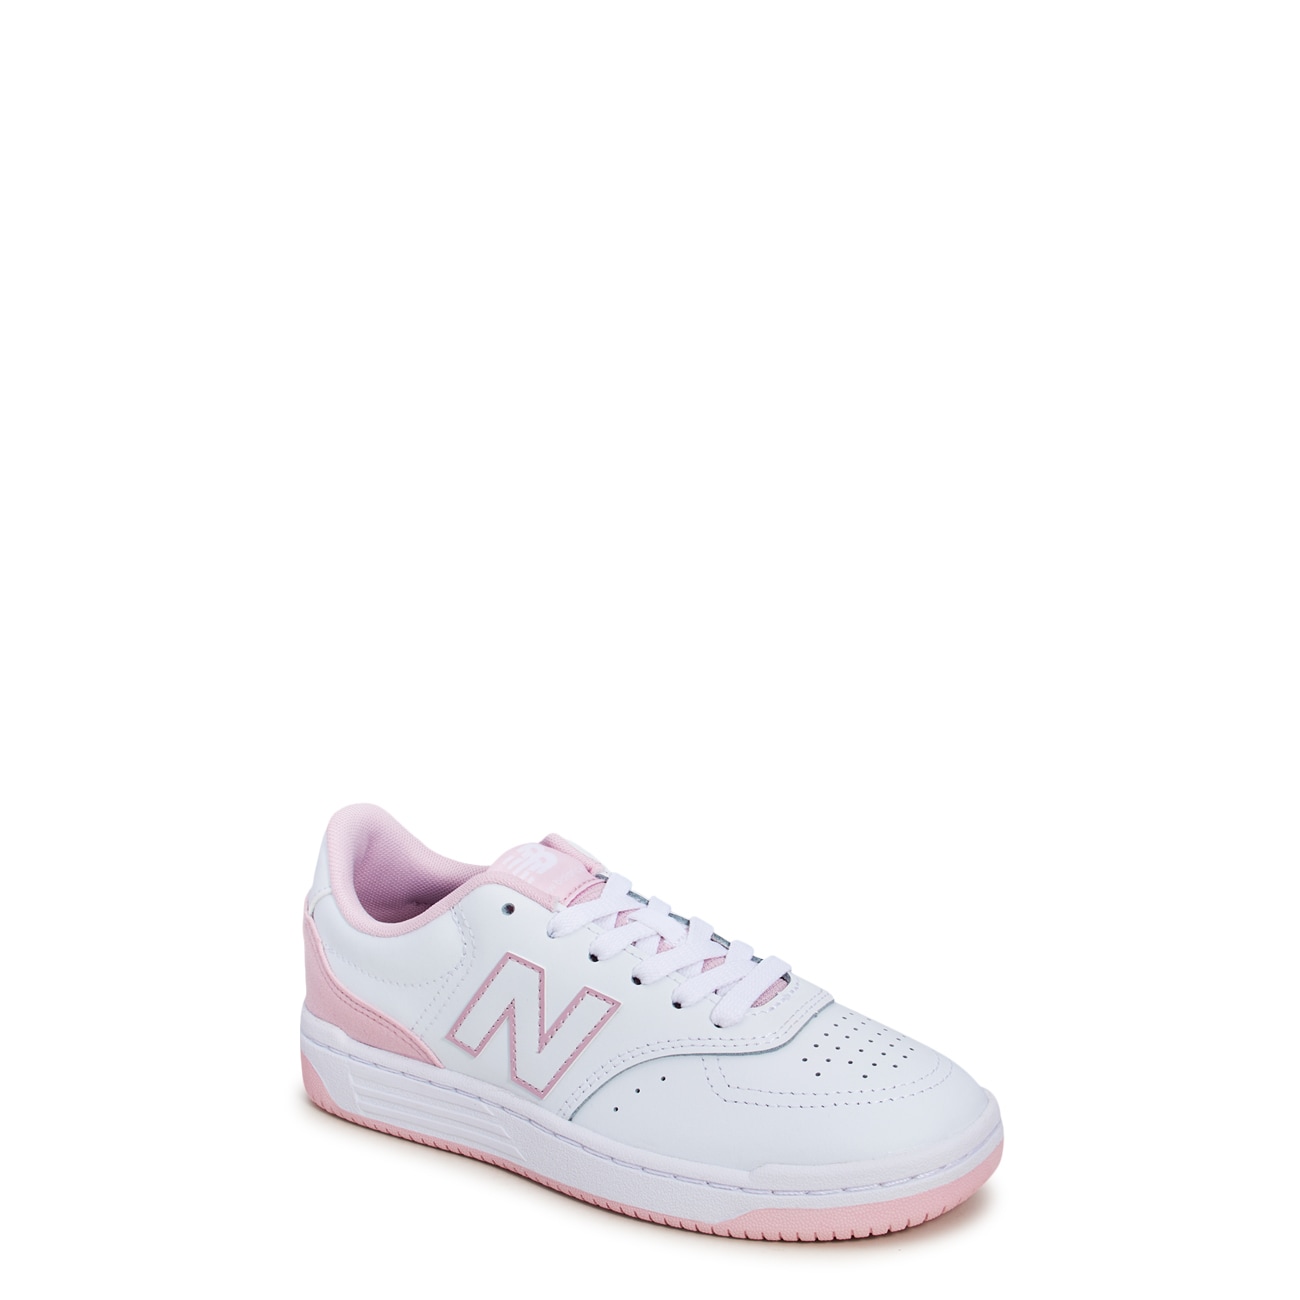 Youth Girls' BB80 Court Sneaker